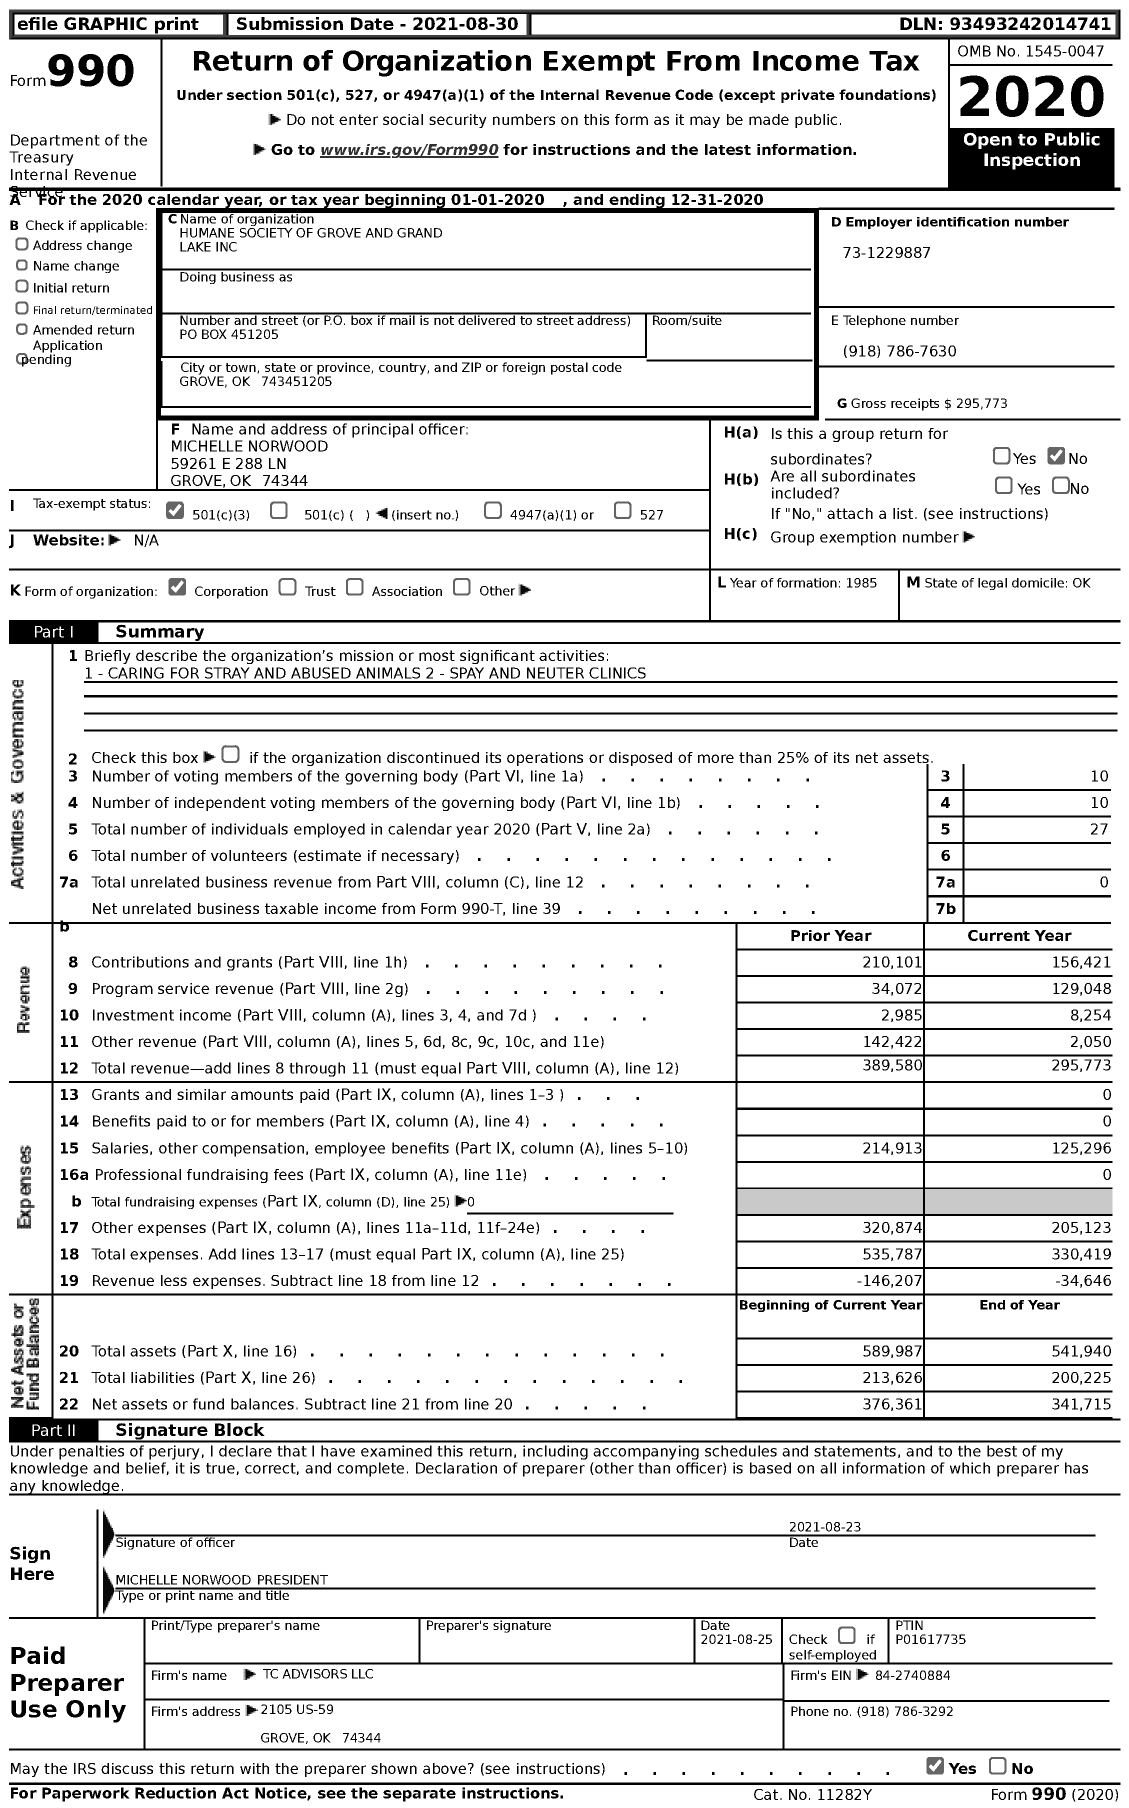 Image of first page of 2020 Form 990 for Humane Society of Grove and Grand Lake